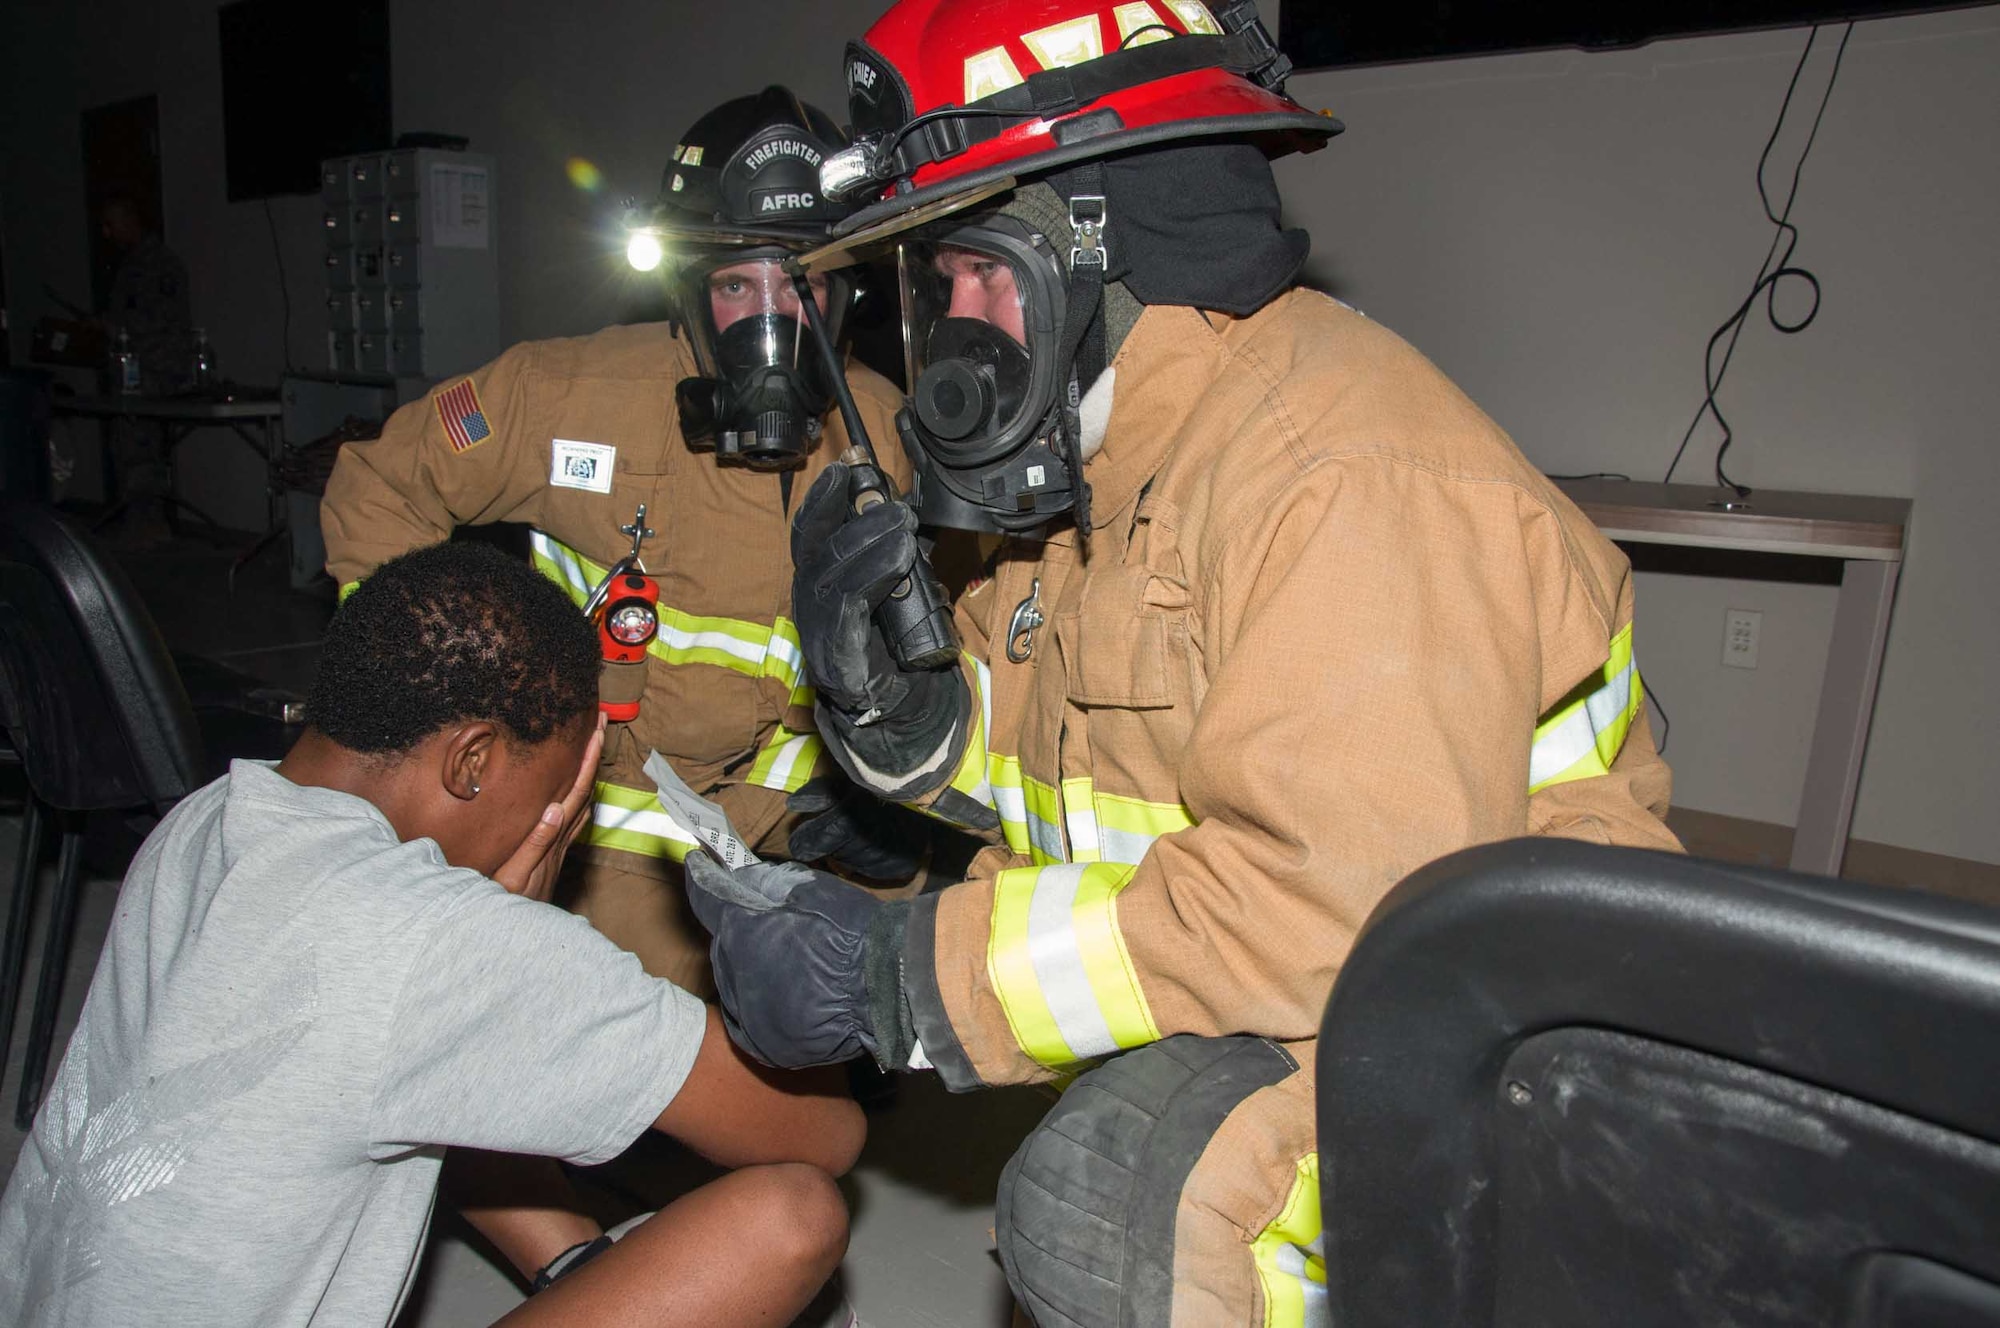 Two firefighters asess the condition of a simulated victim prior to extracting her from the building during a fire response exercise Friday, 11 August 2017, at an undisclosed location in Southwest Asia. (U.S. Air Force photo by Master Sgt. Eric M. Sharman)